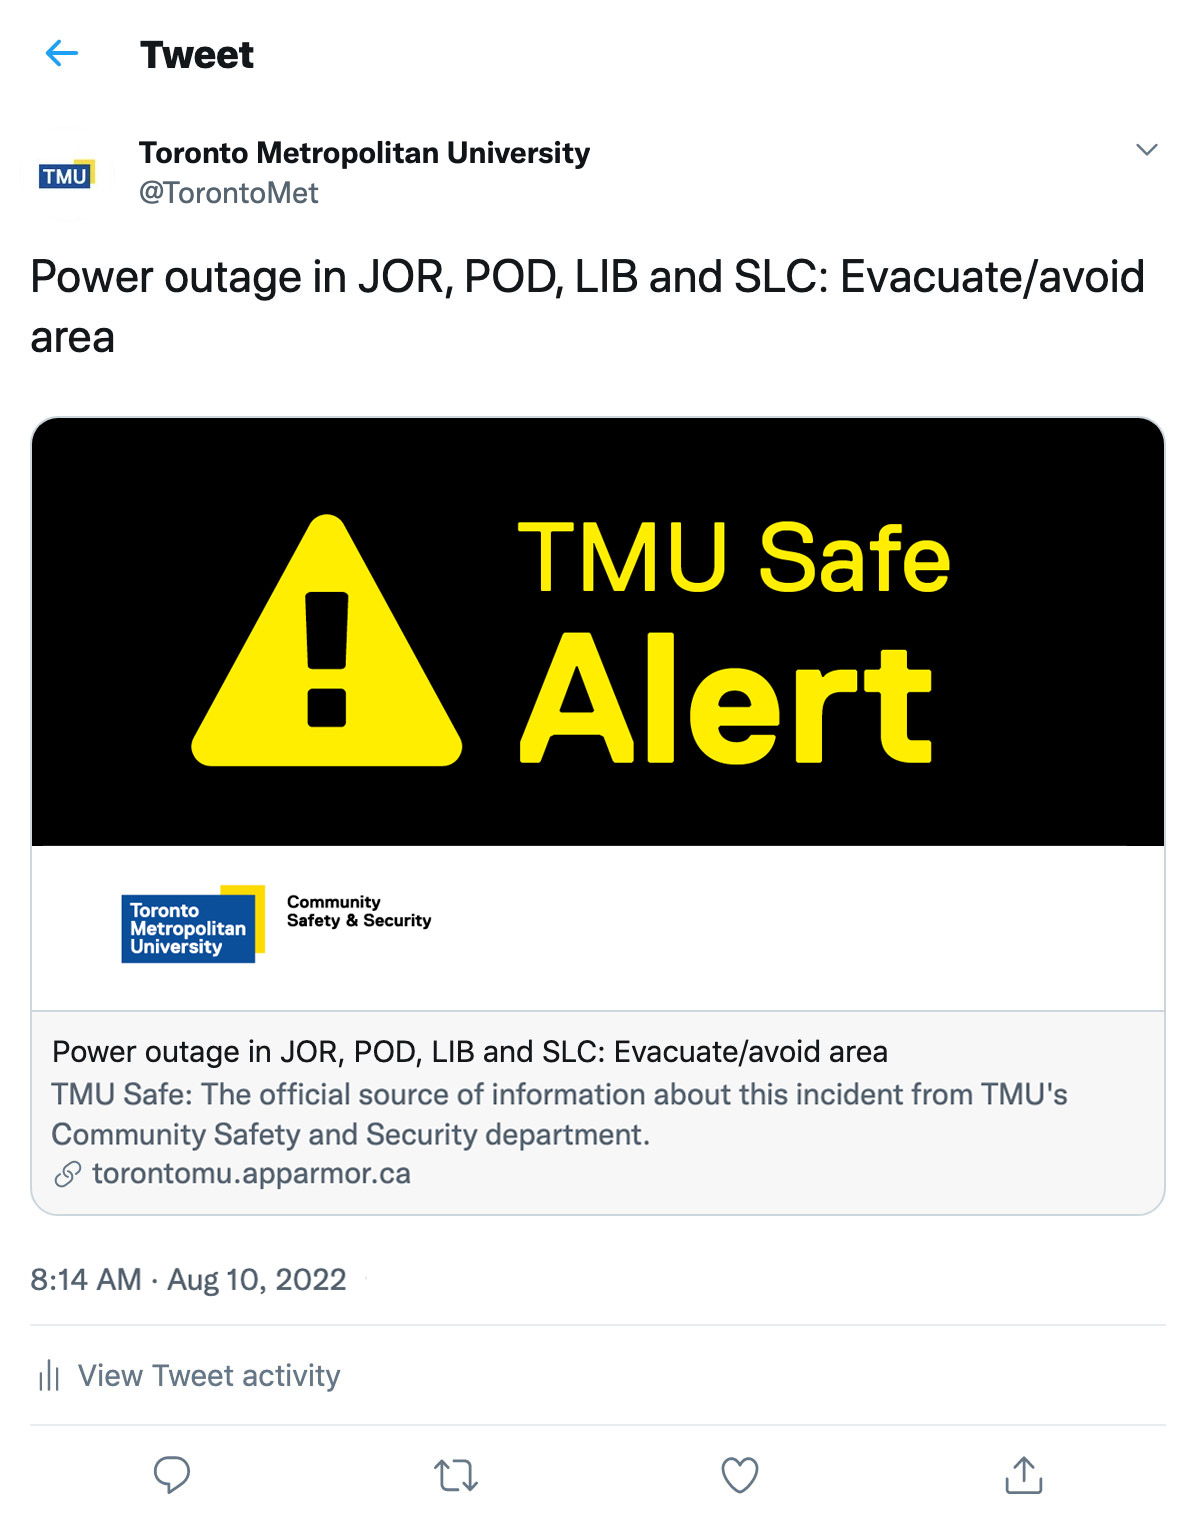 A Tweet from Toronto Metropolitan University with test alert content pointing to TMU Safe.